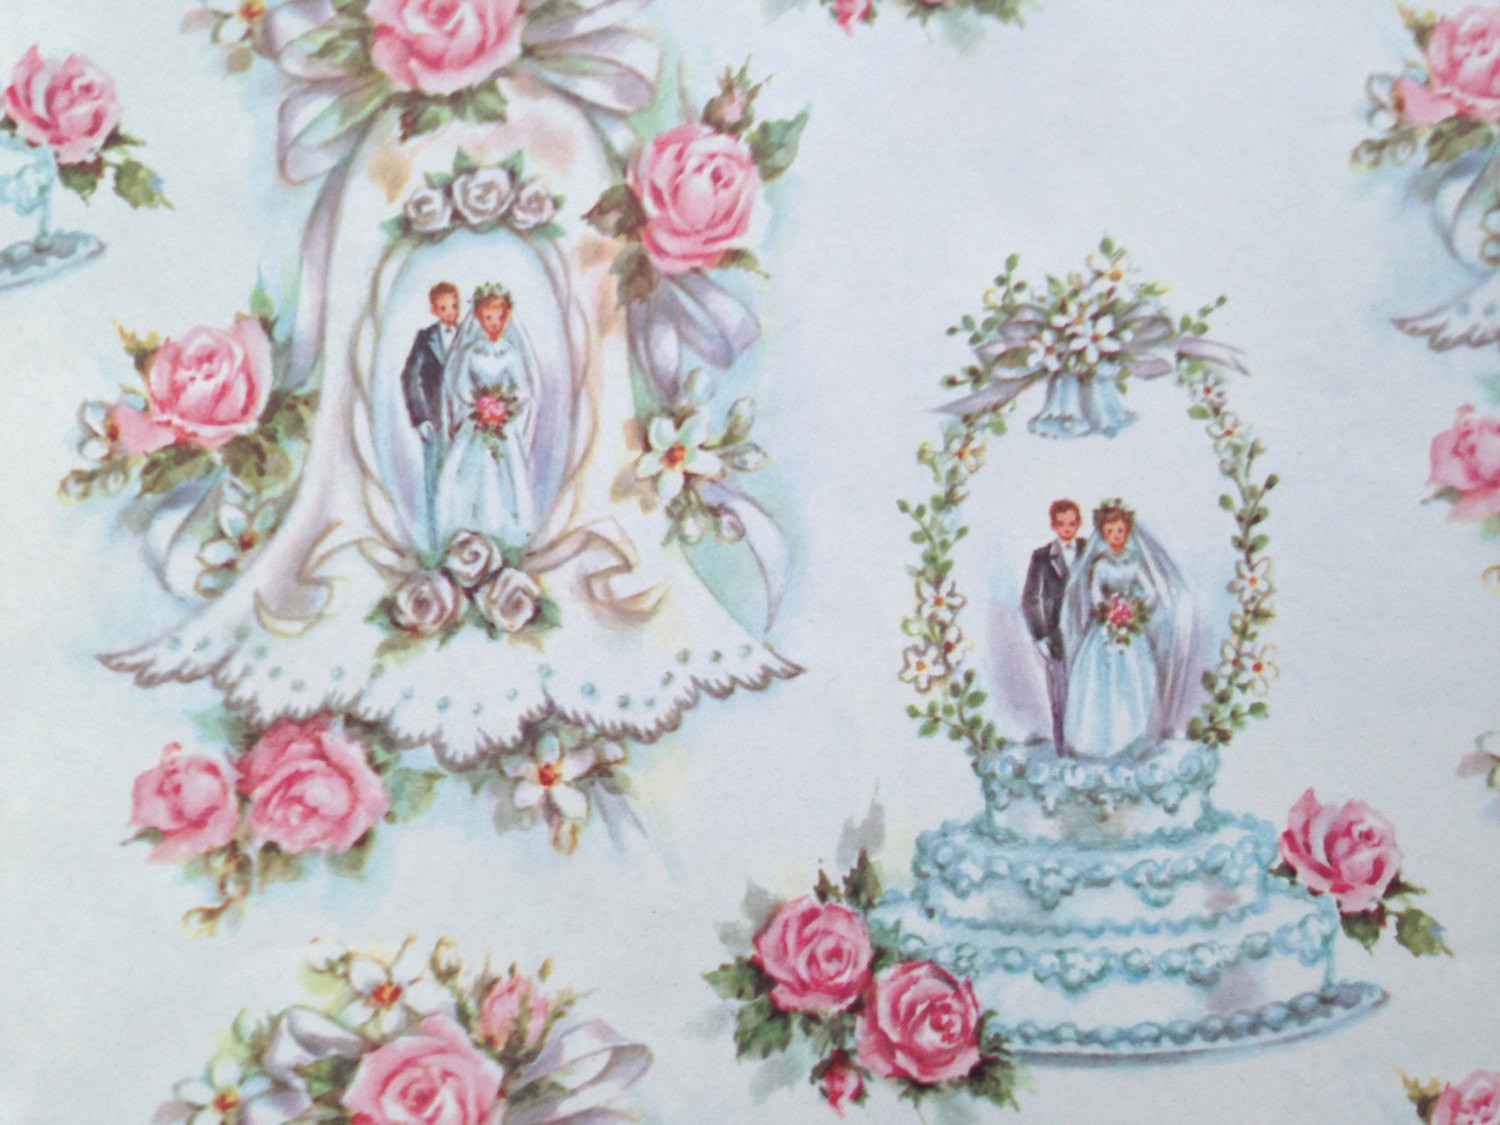 Wedding Gift Wrapping Paper
 Vintage Gift Wrapping Paper Bridal Shower Wedding Cake